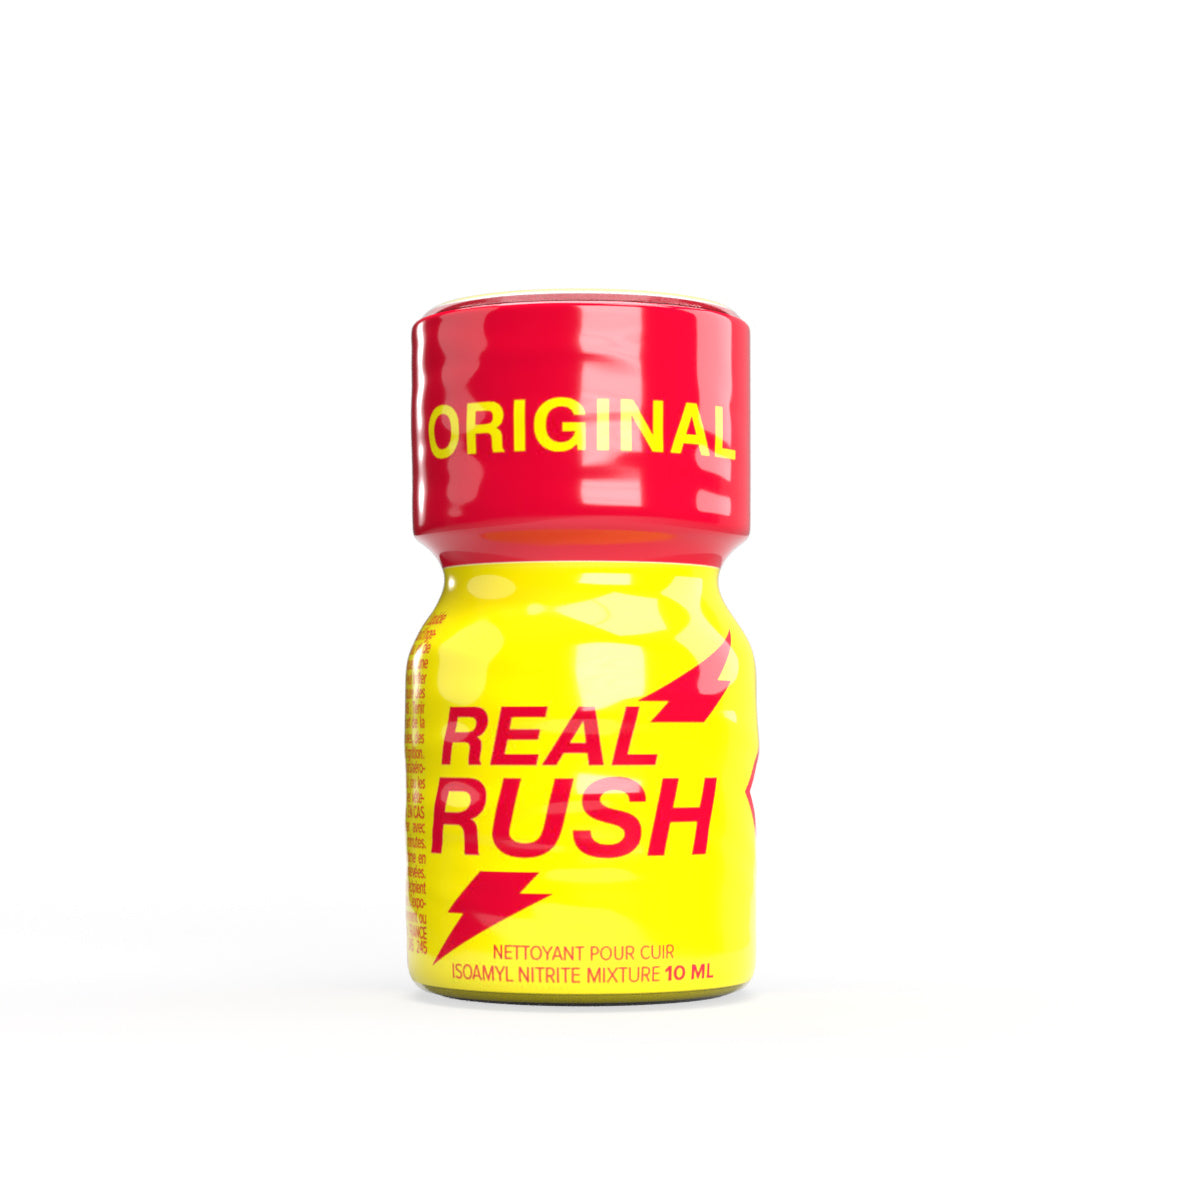 A front facing product photo of a bottle of Real Rush Poppers.